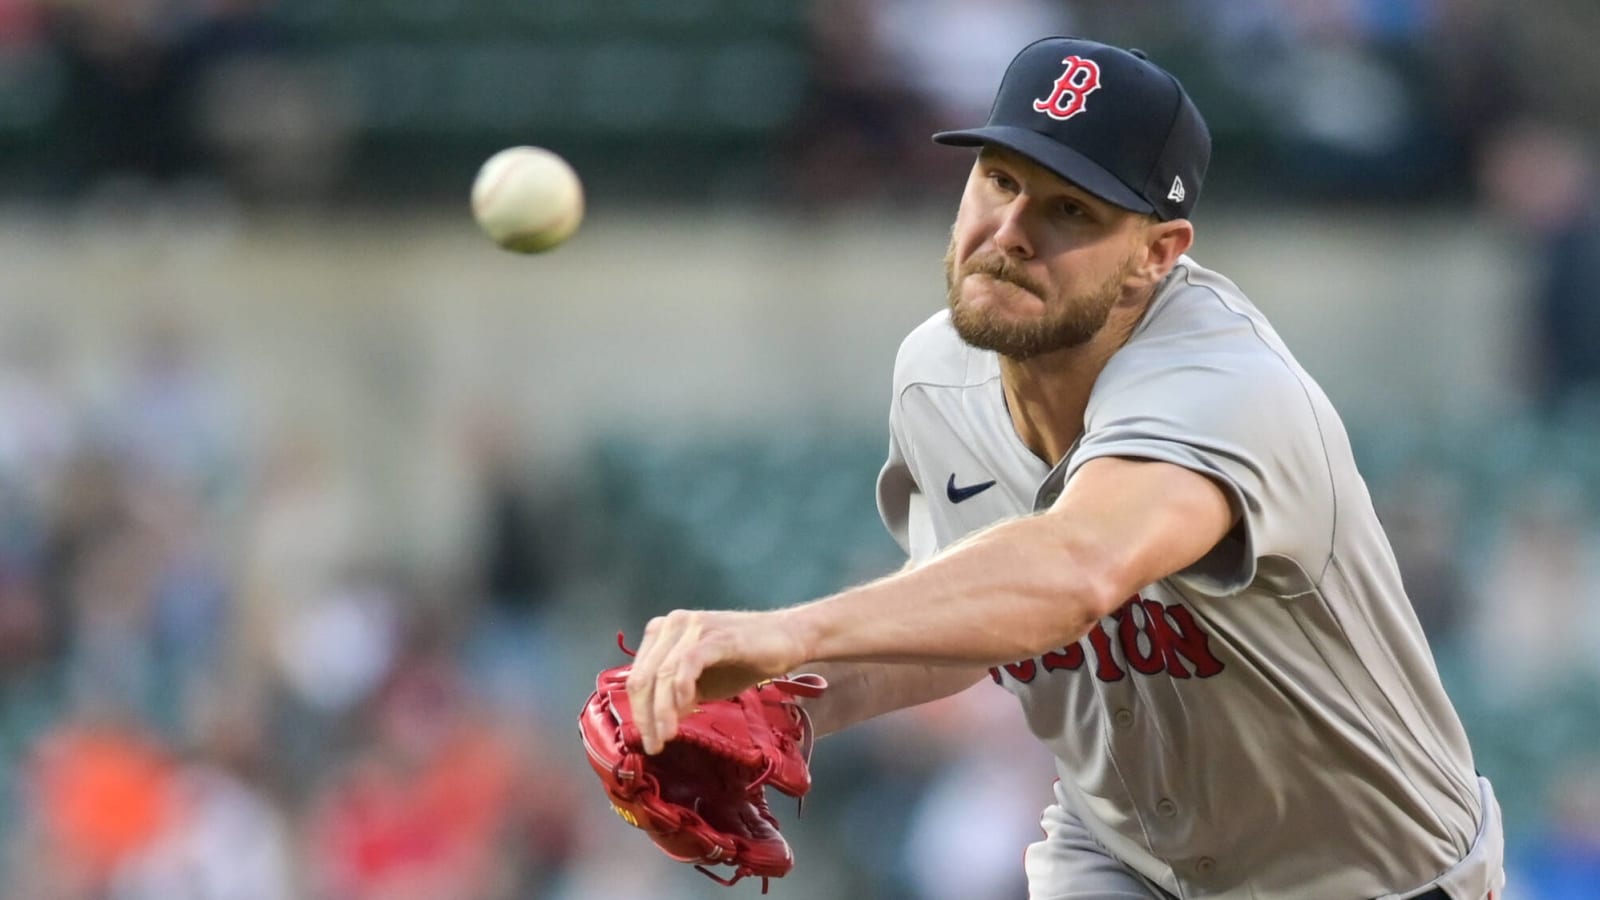 Chris Sale beats up Gatorade cooler in dugout after poor outing